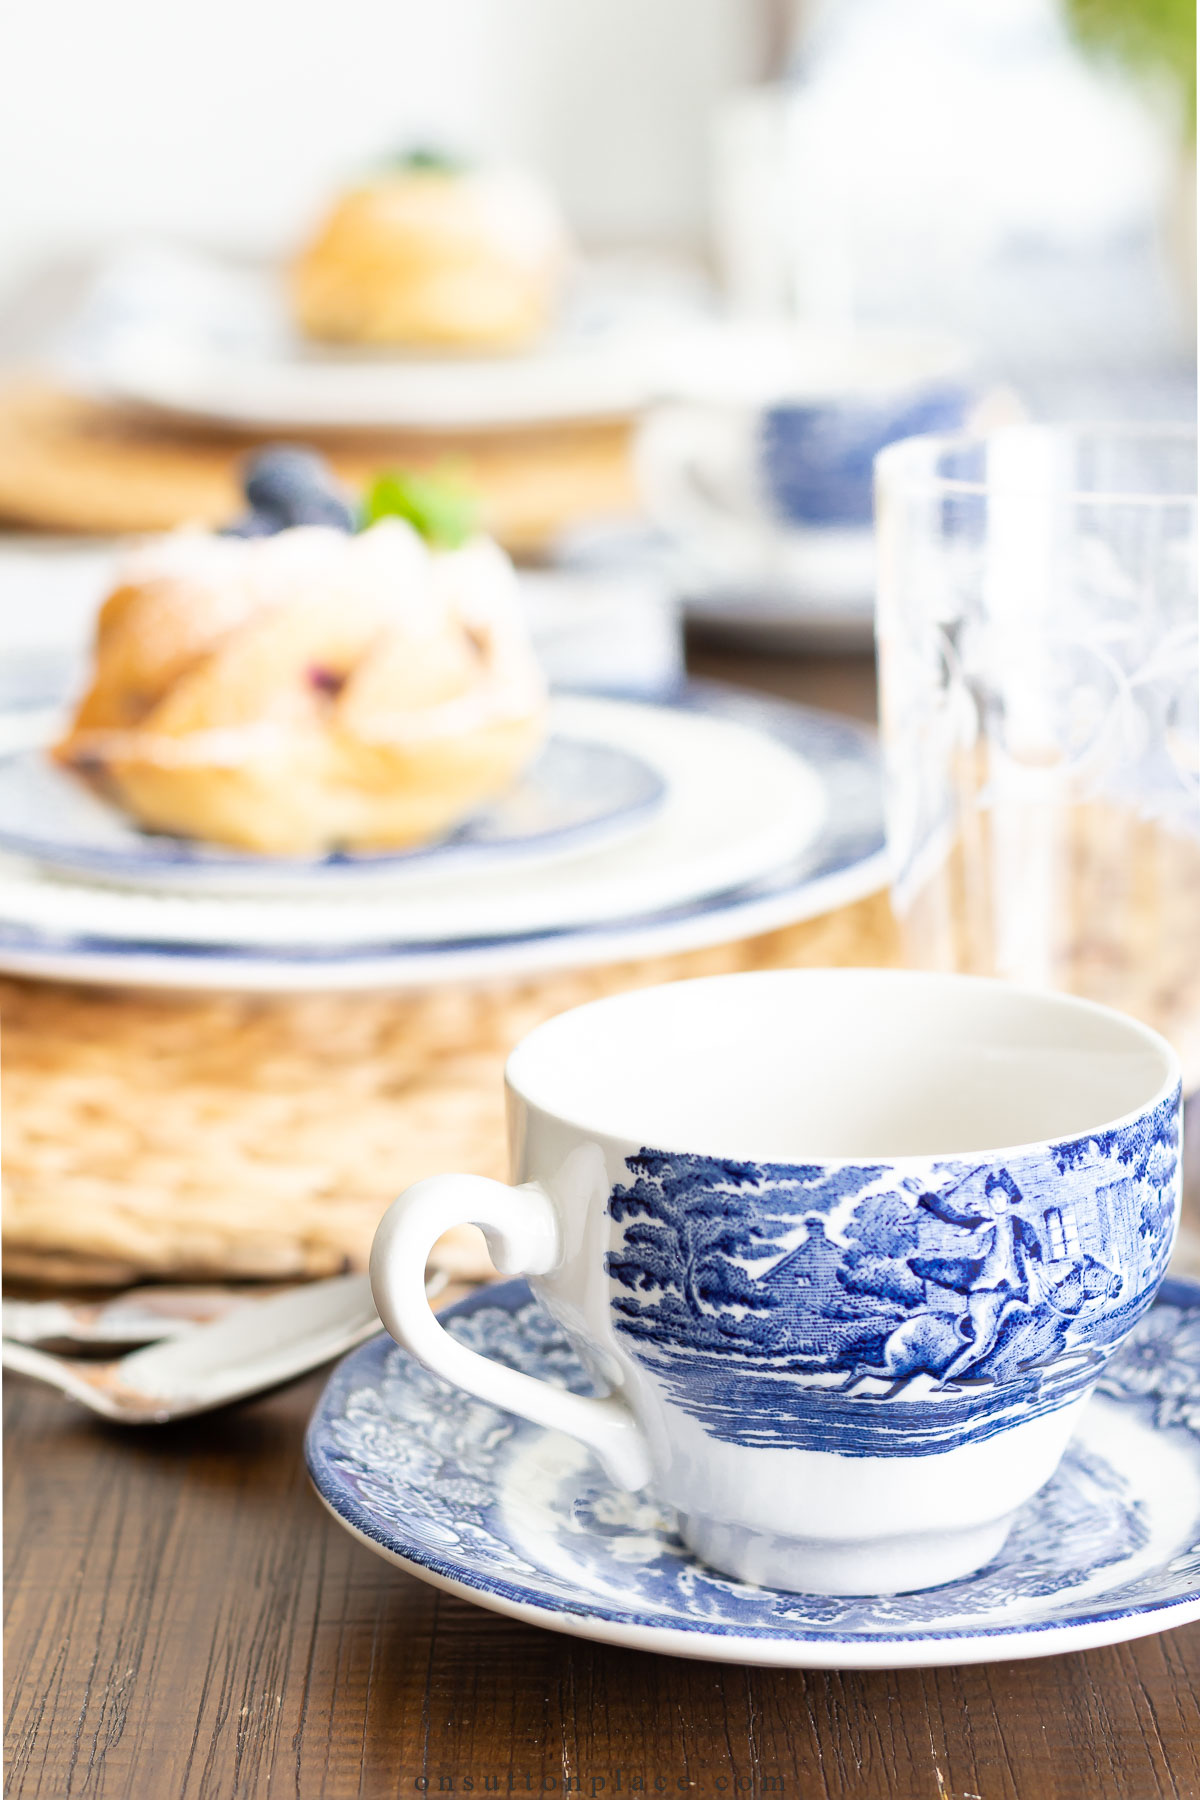 Blue & White Cup & Saucer Sets - Royal Table Settings – Royal